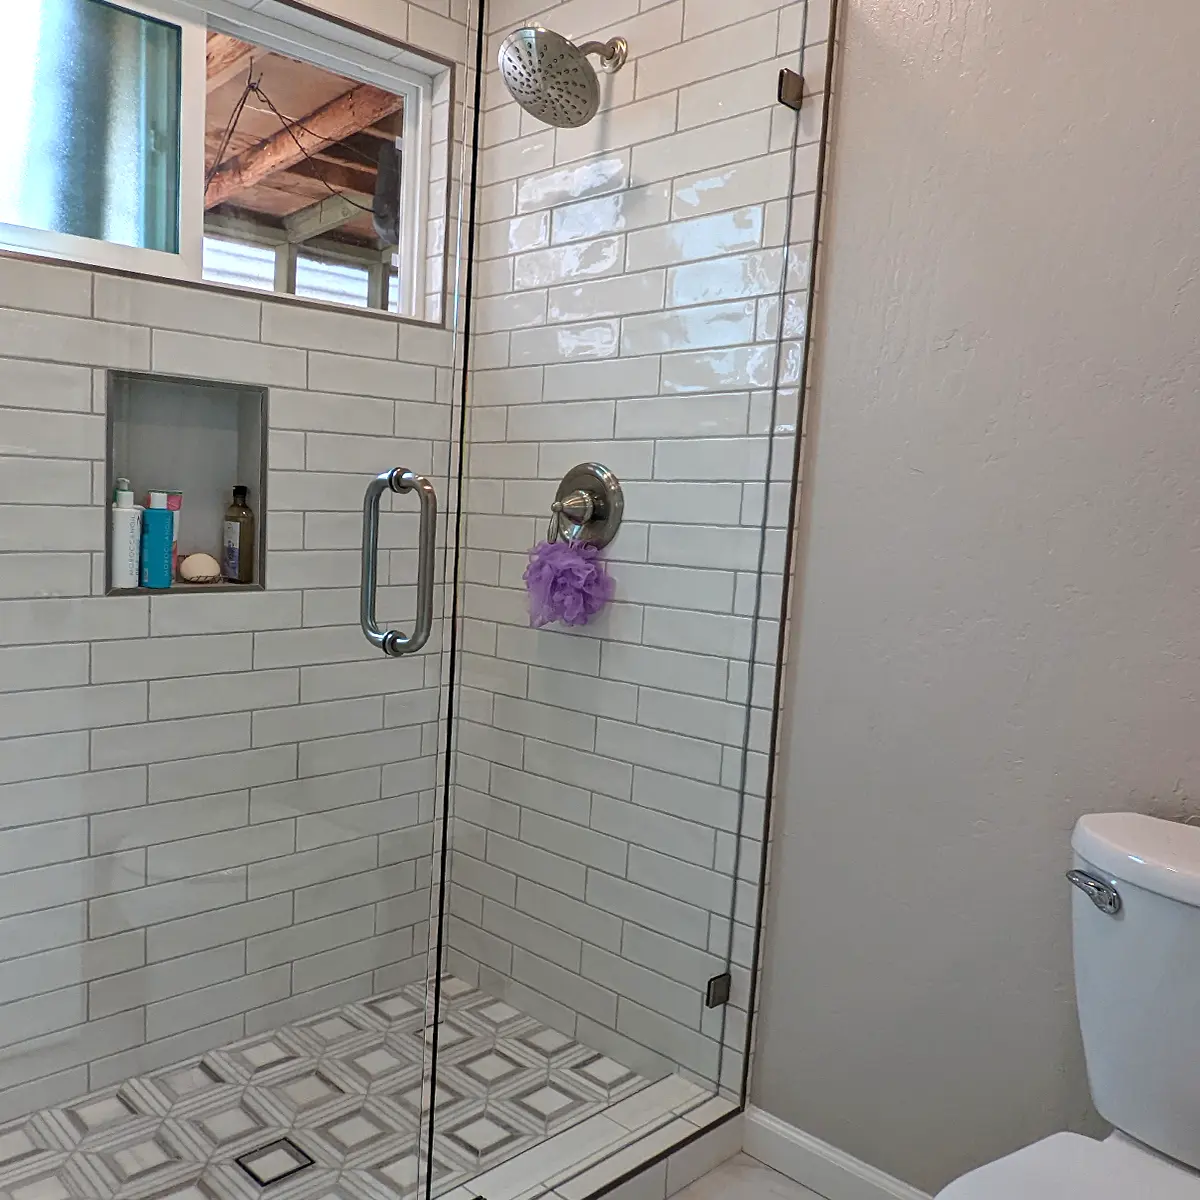 Glass shower with rectangular tile and a purple sponge